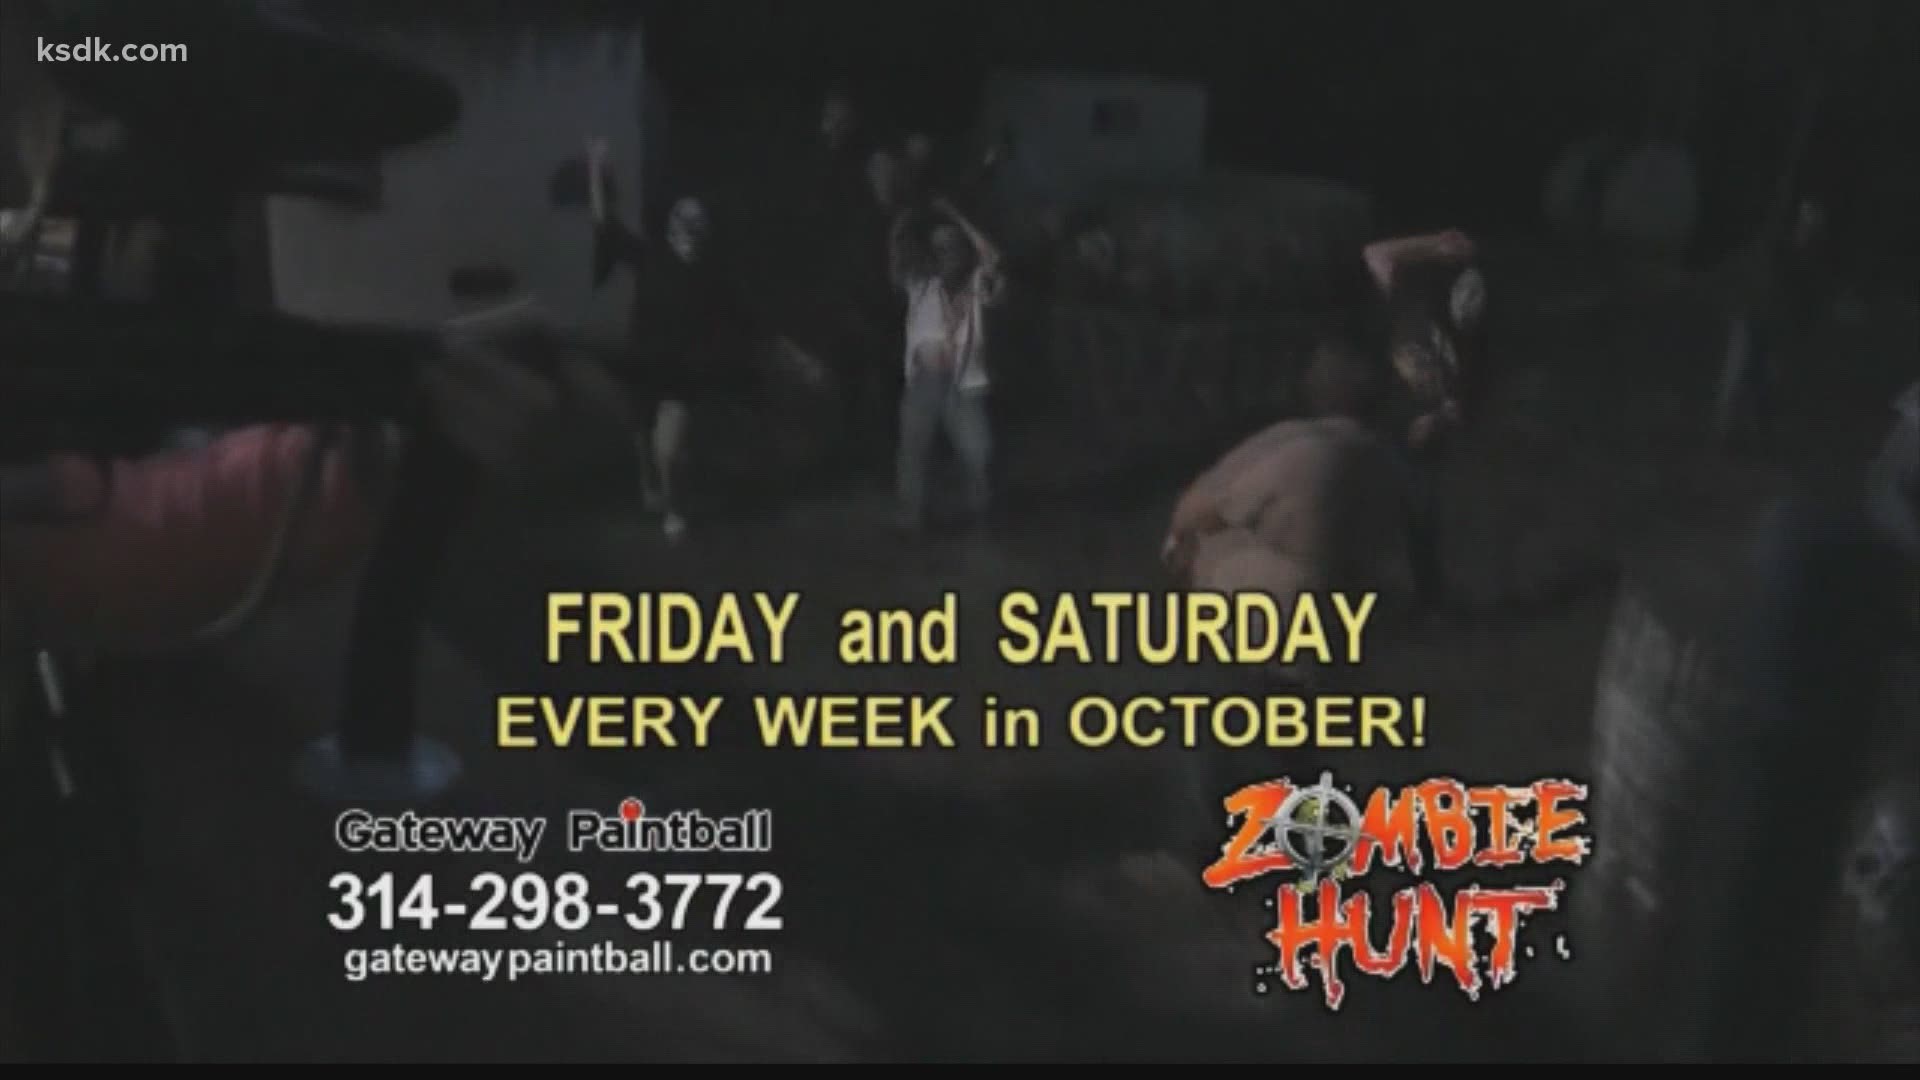 The event will be held every Friday and Saturday night in October. For more information and to purchase tickets, visit the website at zombiestl.com.